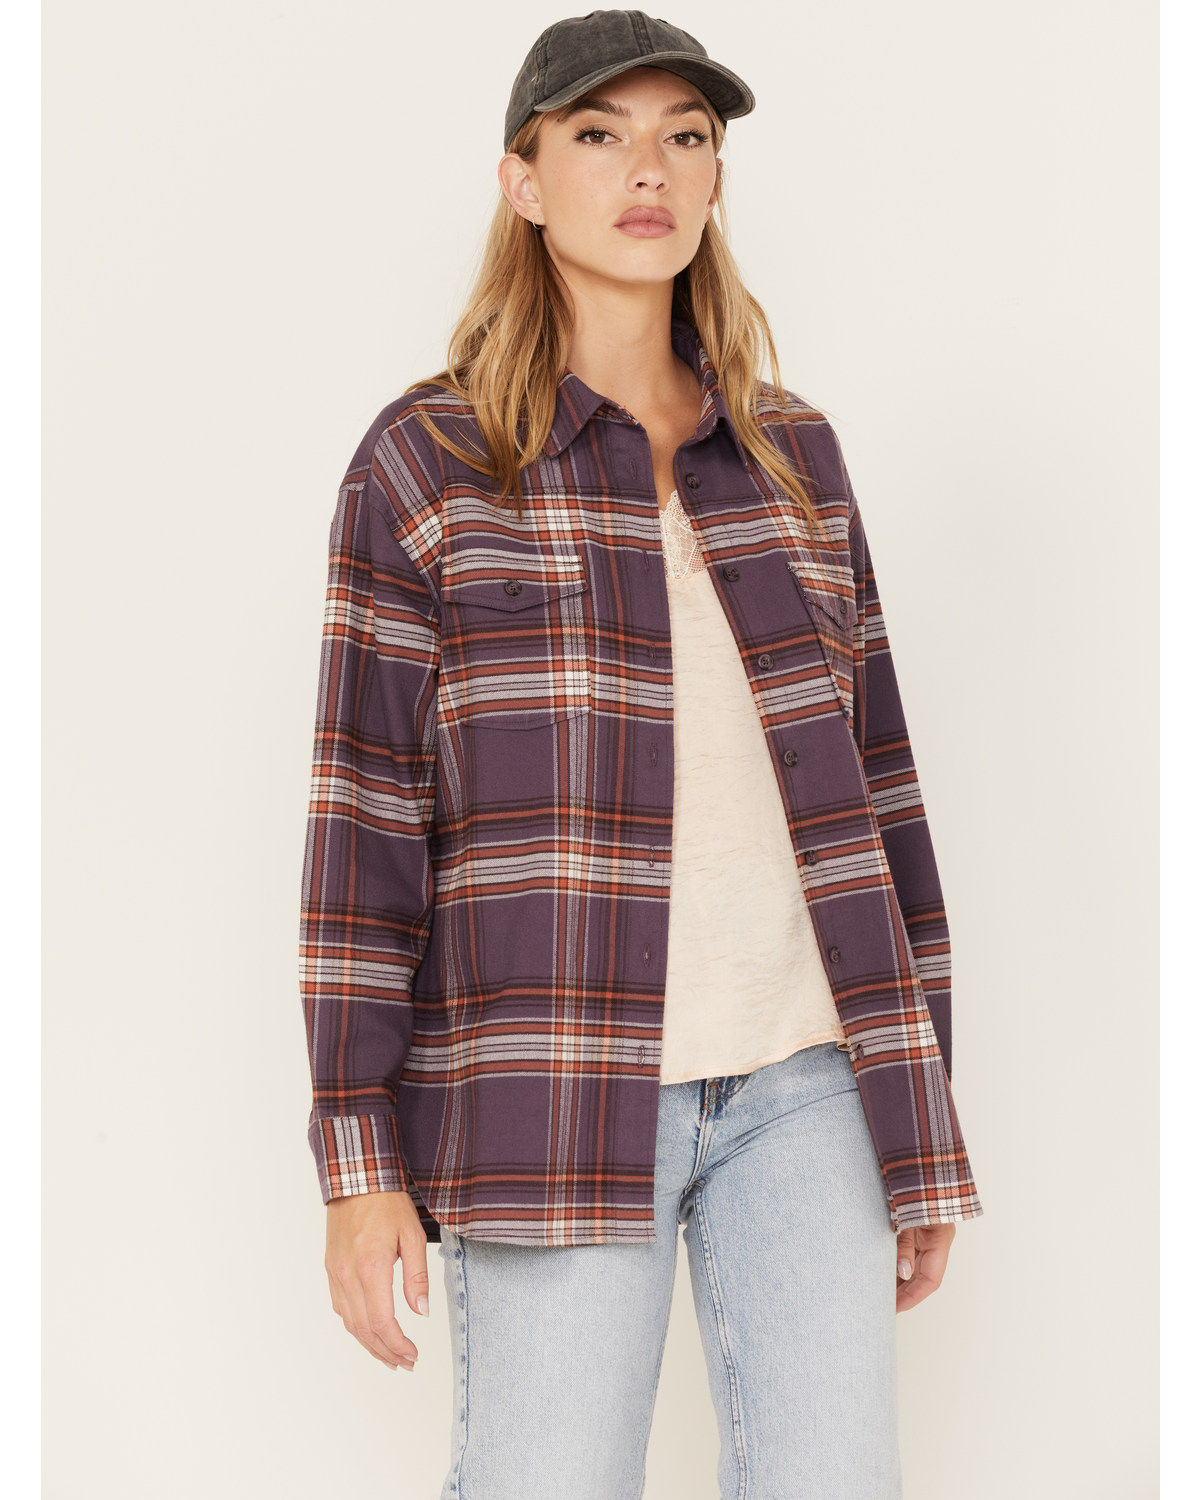 Cleo + Wolf Women's Plaid Print Oversized Long Sleeve Flannel Button Down Shirt